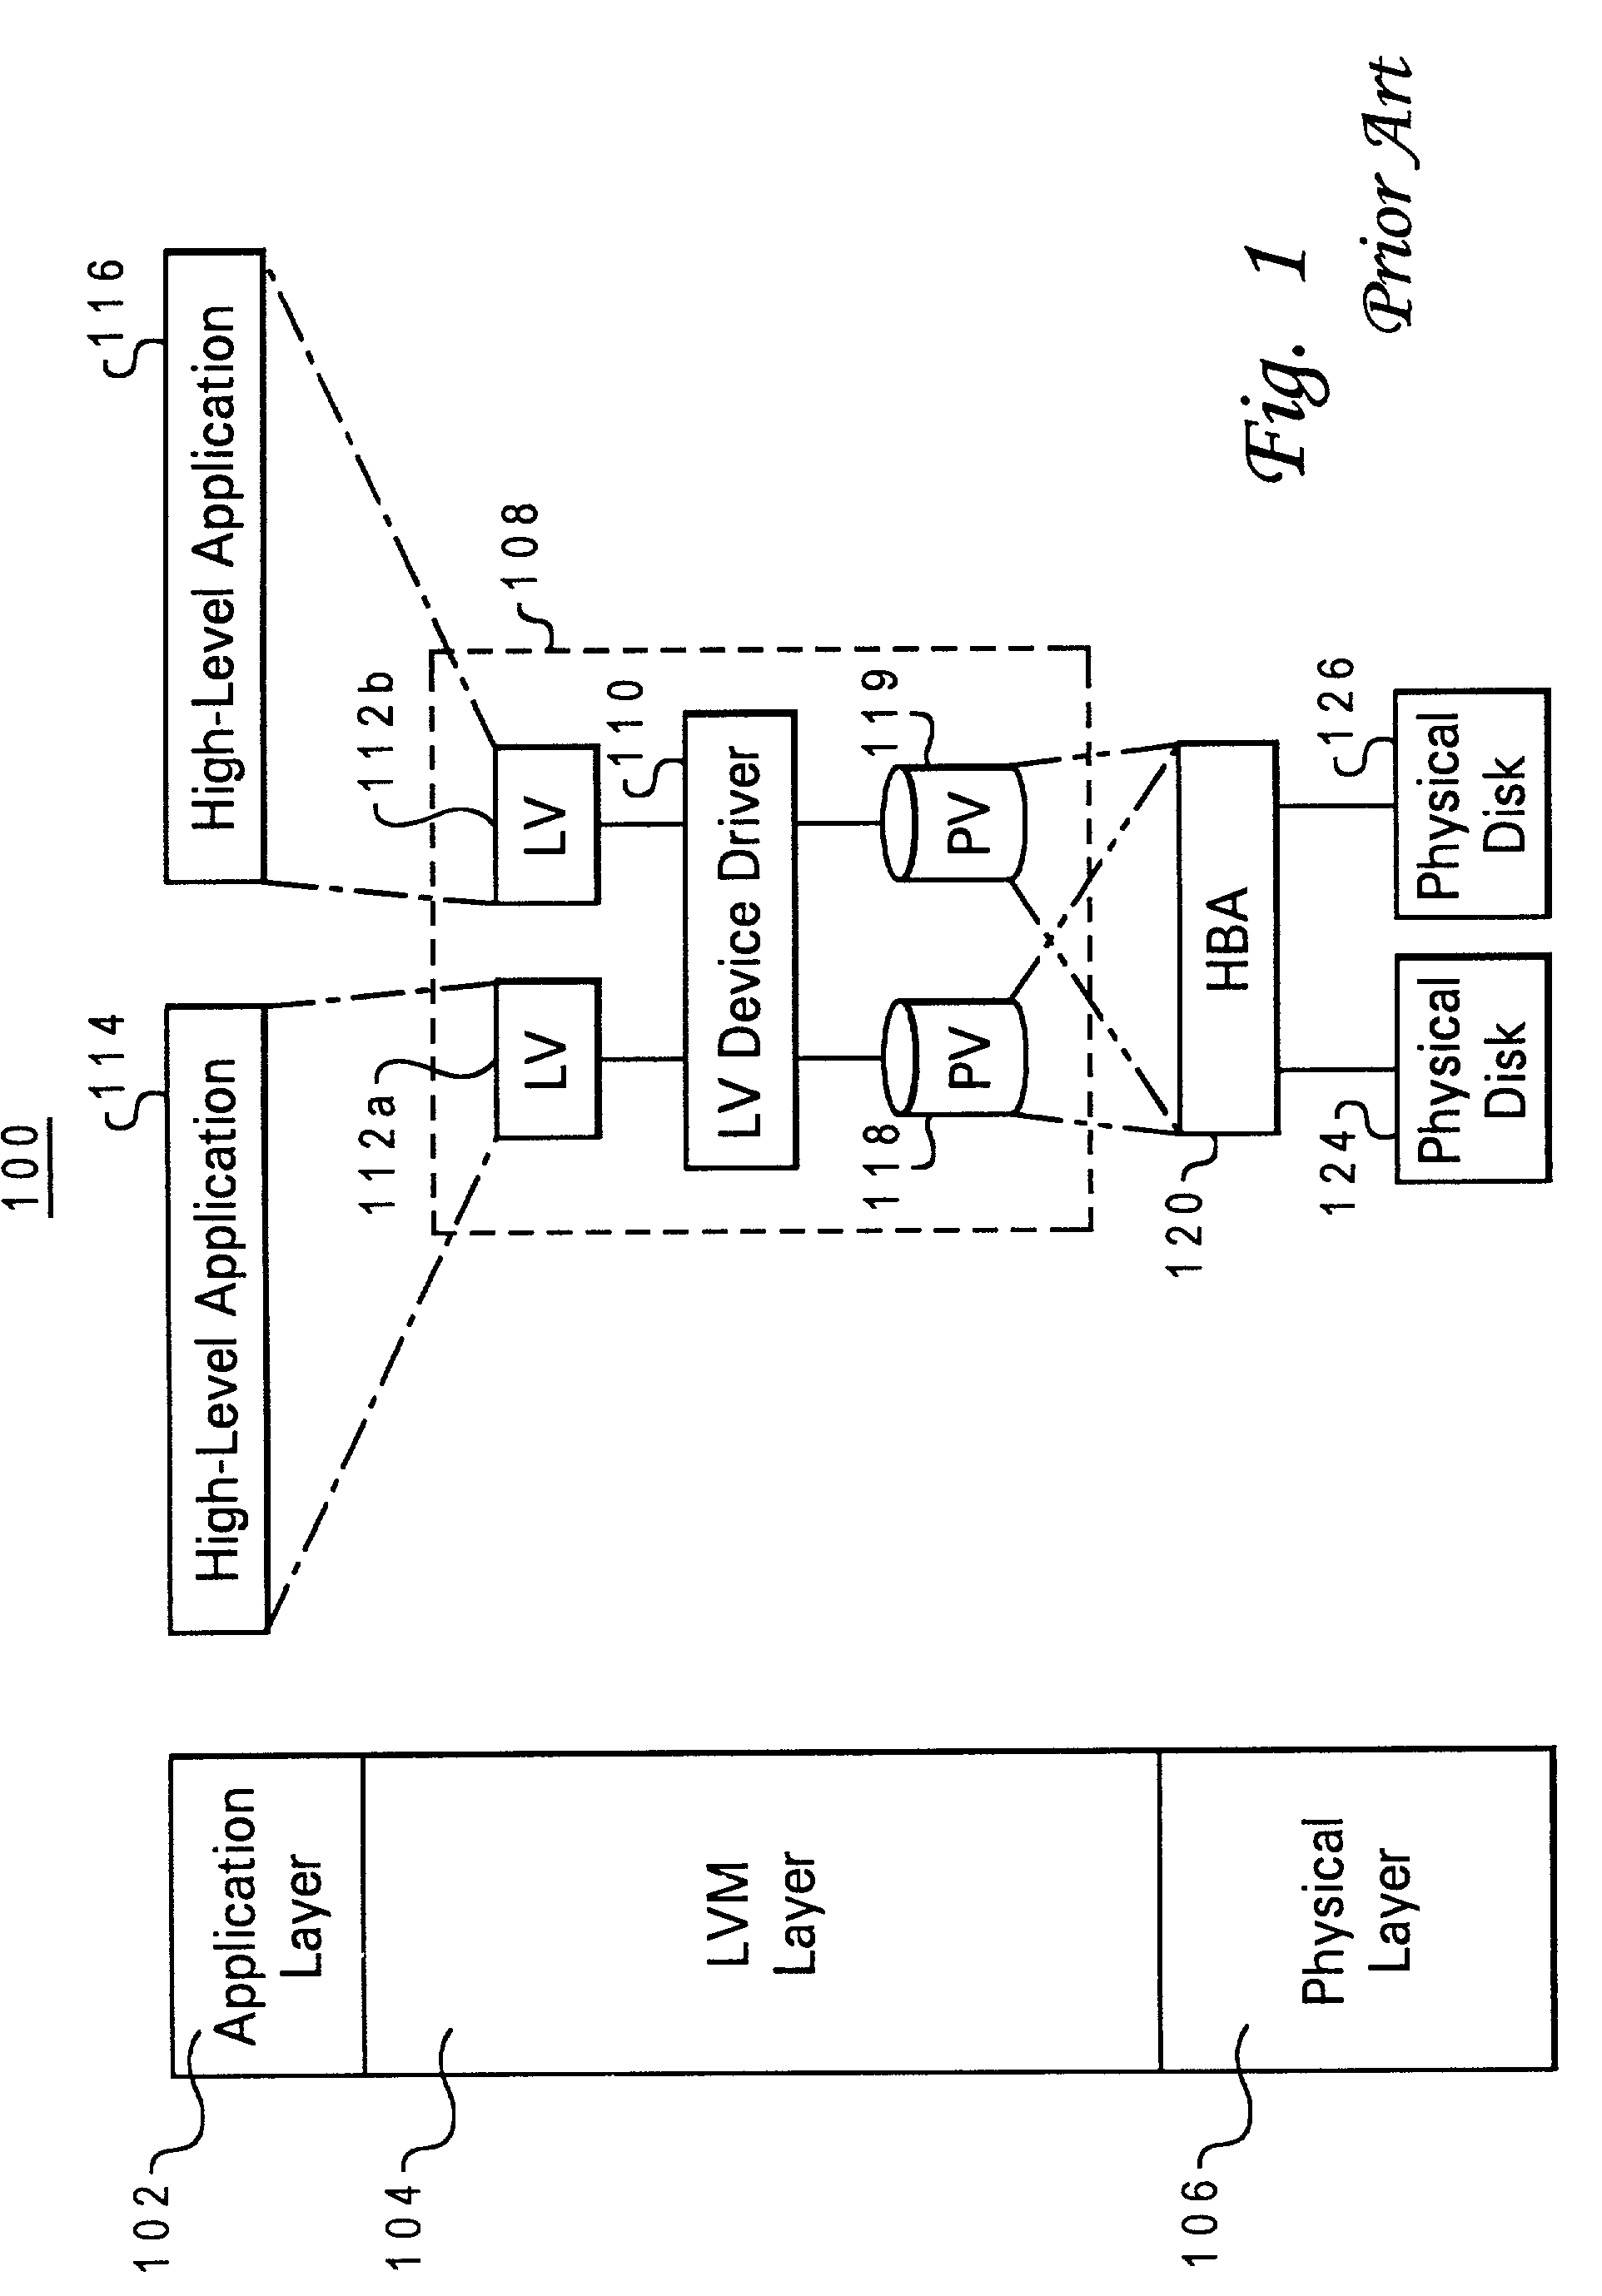 Limited concurrent host access in a logical volume management data storage environment